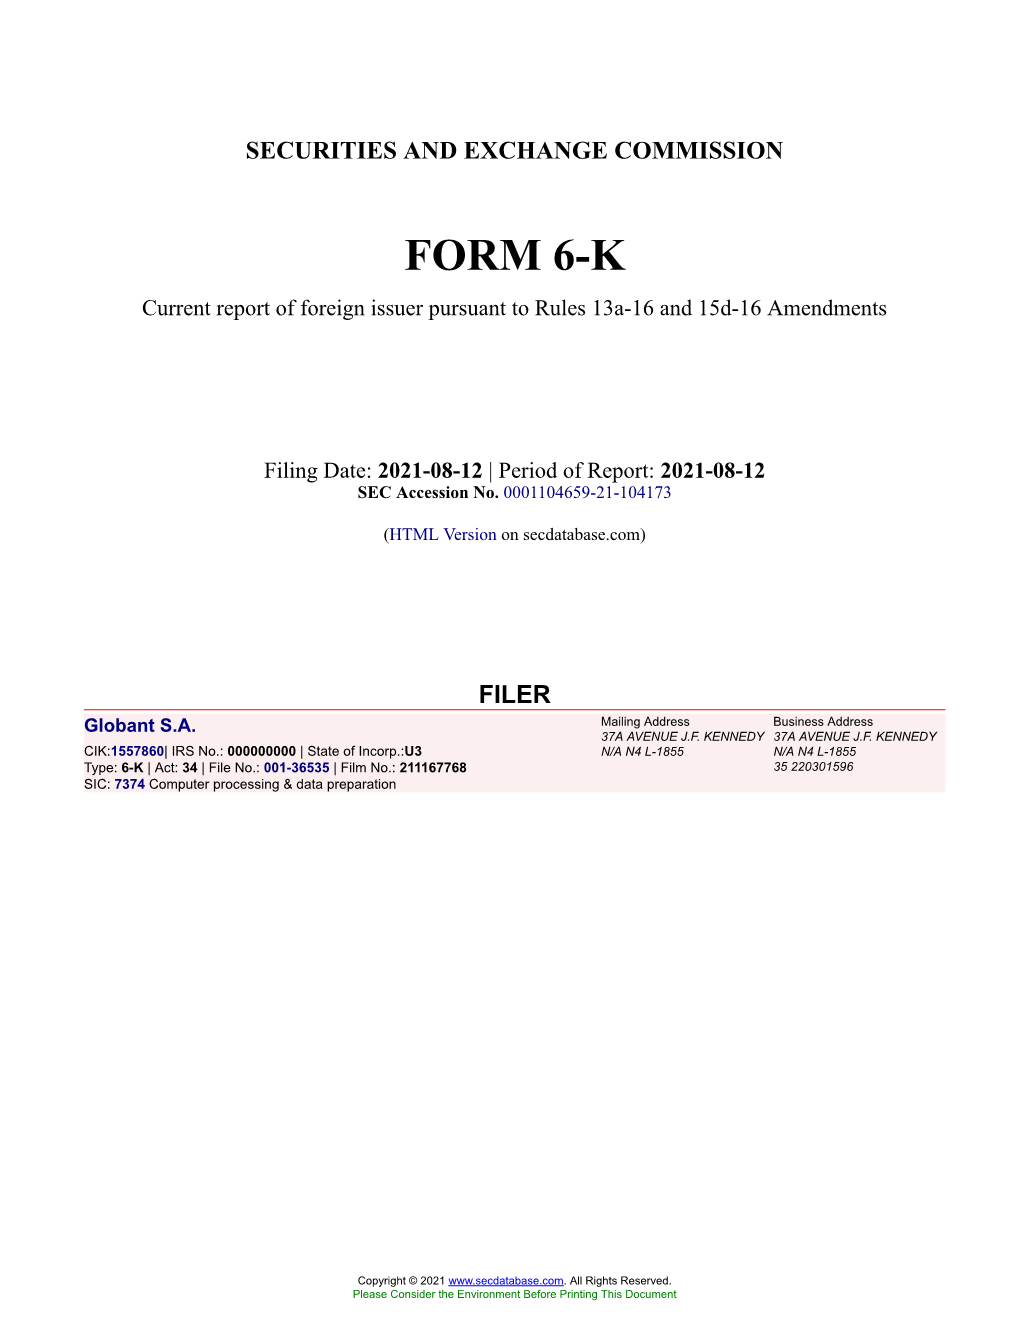 Globant S.A. Form 6-K Current Event Report Filed 2021-08-12